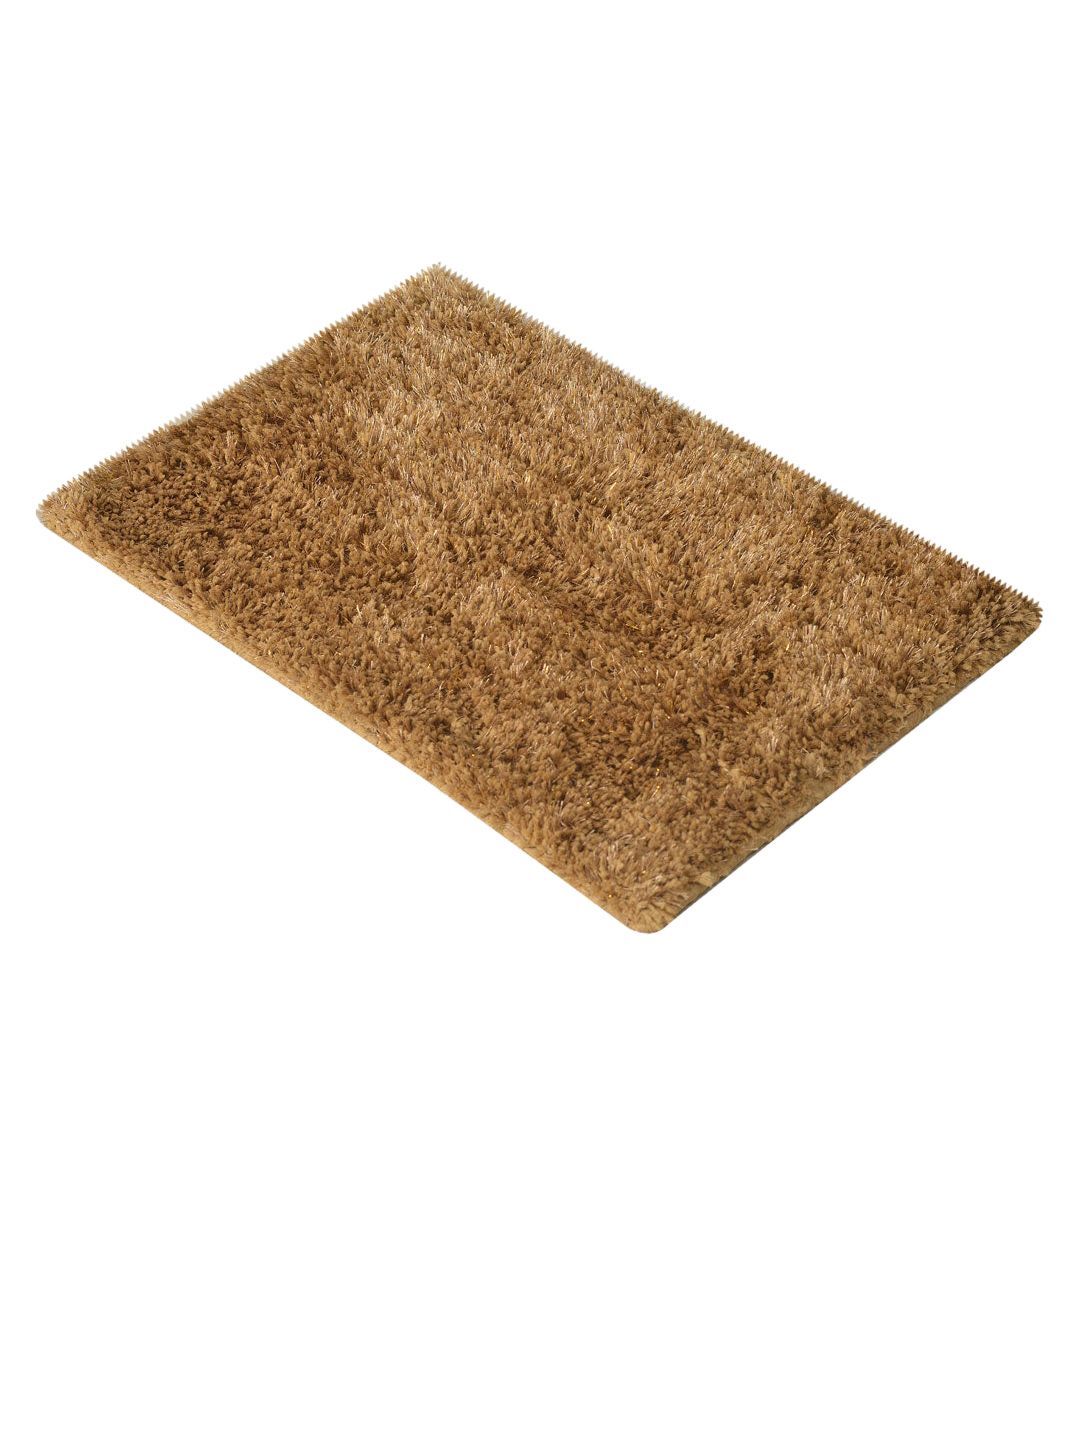 Athome by Nilkamal Gold-Toned Solid Bath Rug Price in India